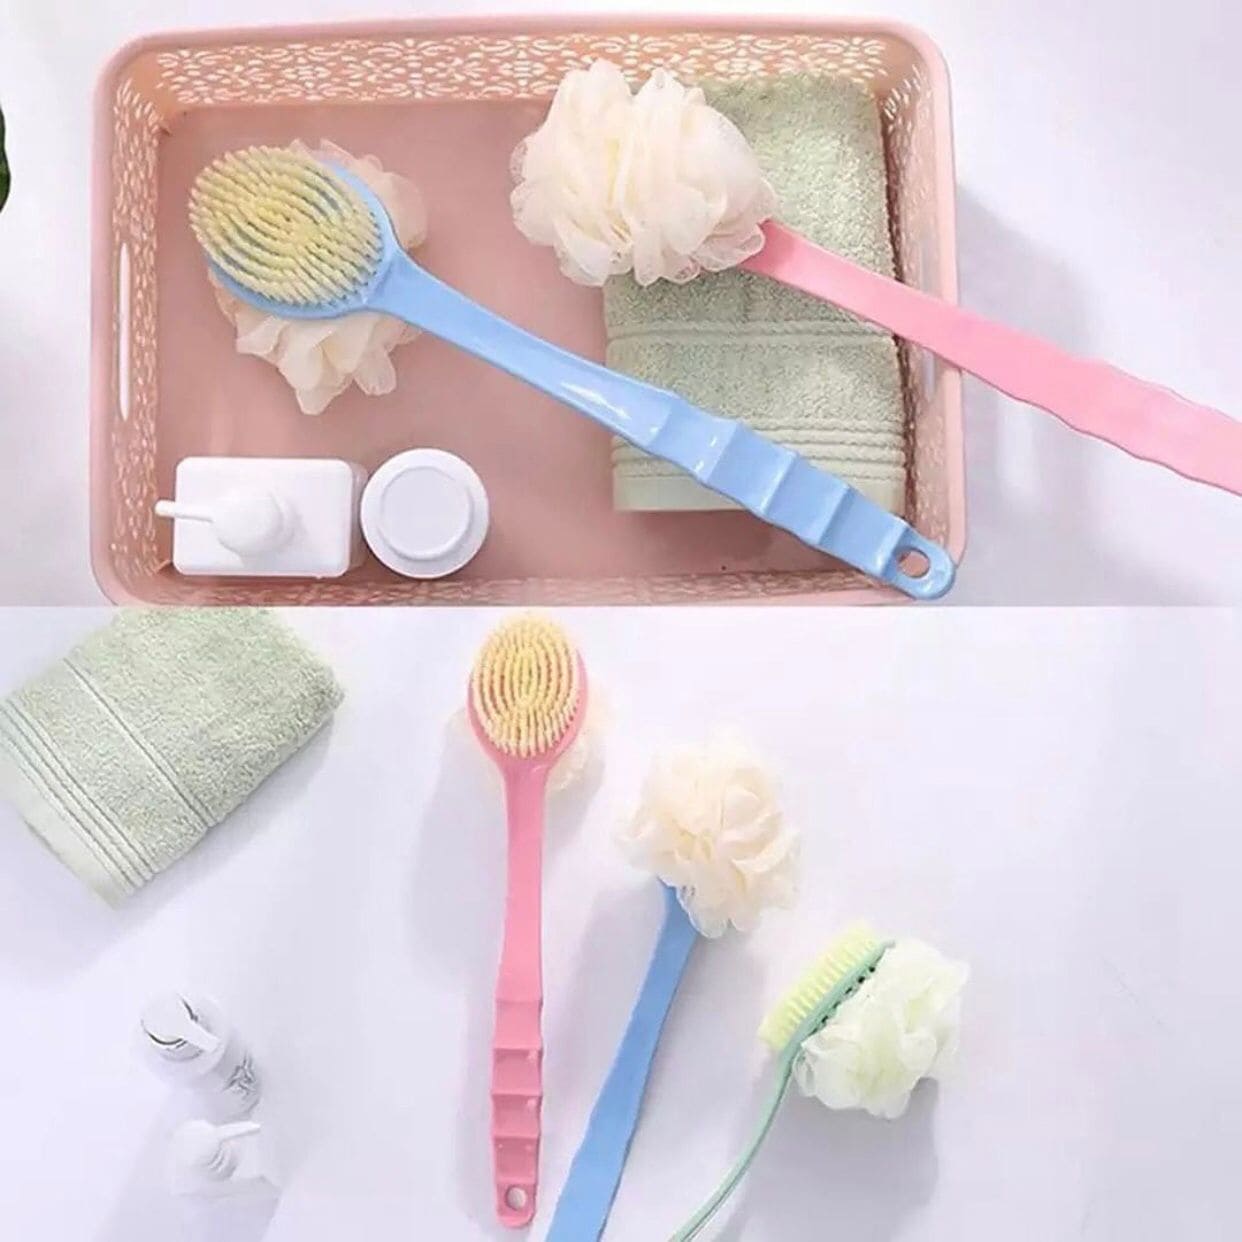 2 In 1 Bathing Scrubbing Long Handle Brush, Shower Body Brush with Bristles and Loofah, Back Scrubber Bath Mesh Sponge with Curved Long Handle, Back Scrubber Body Brush